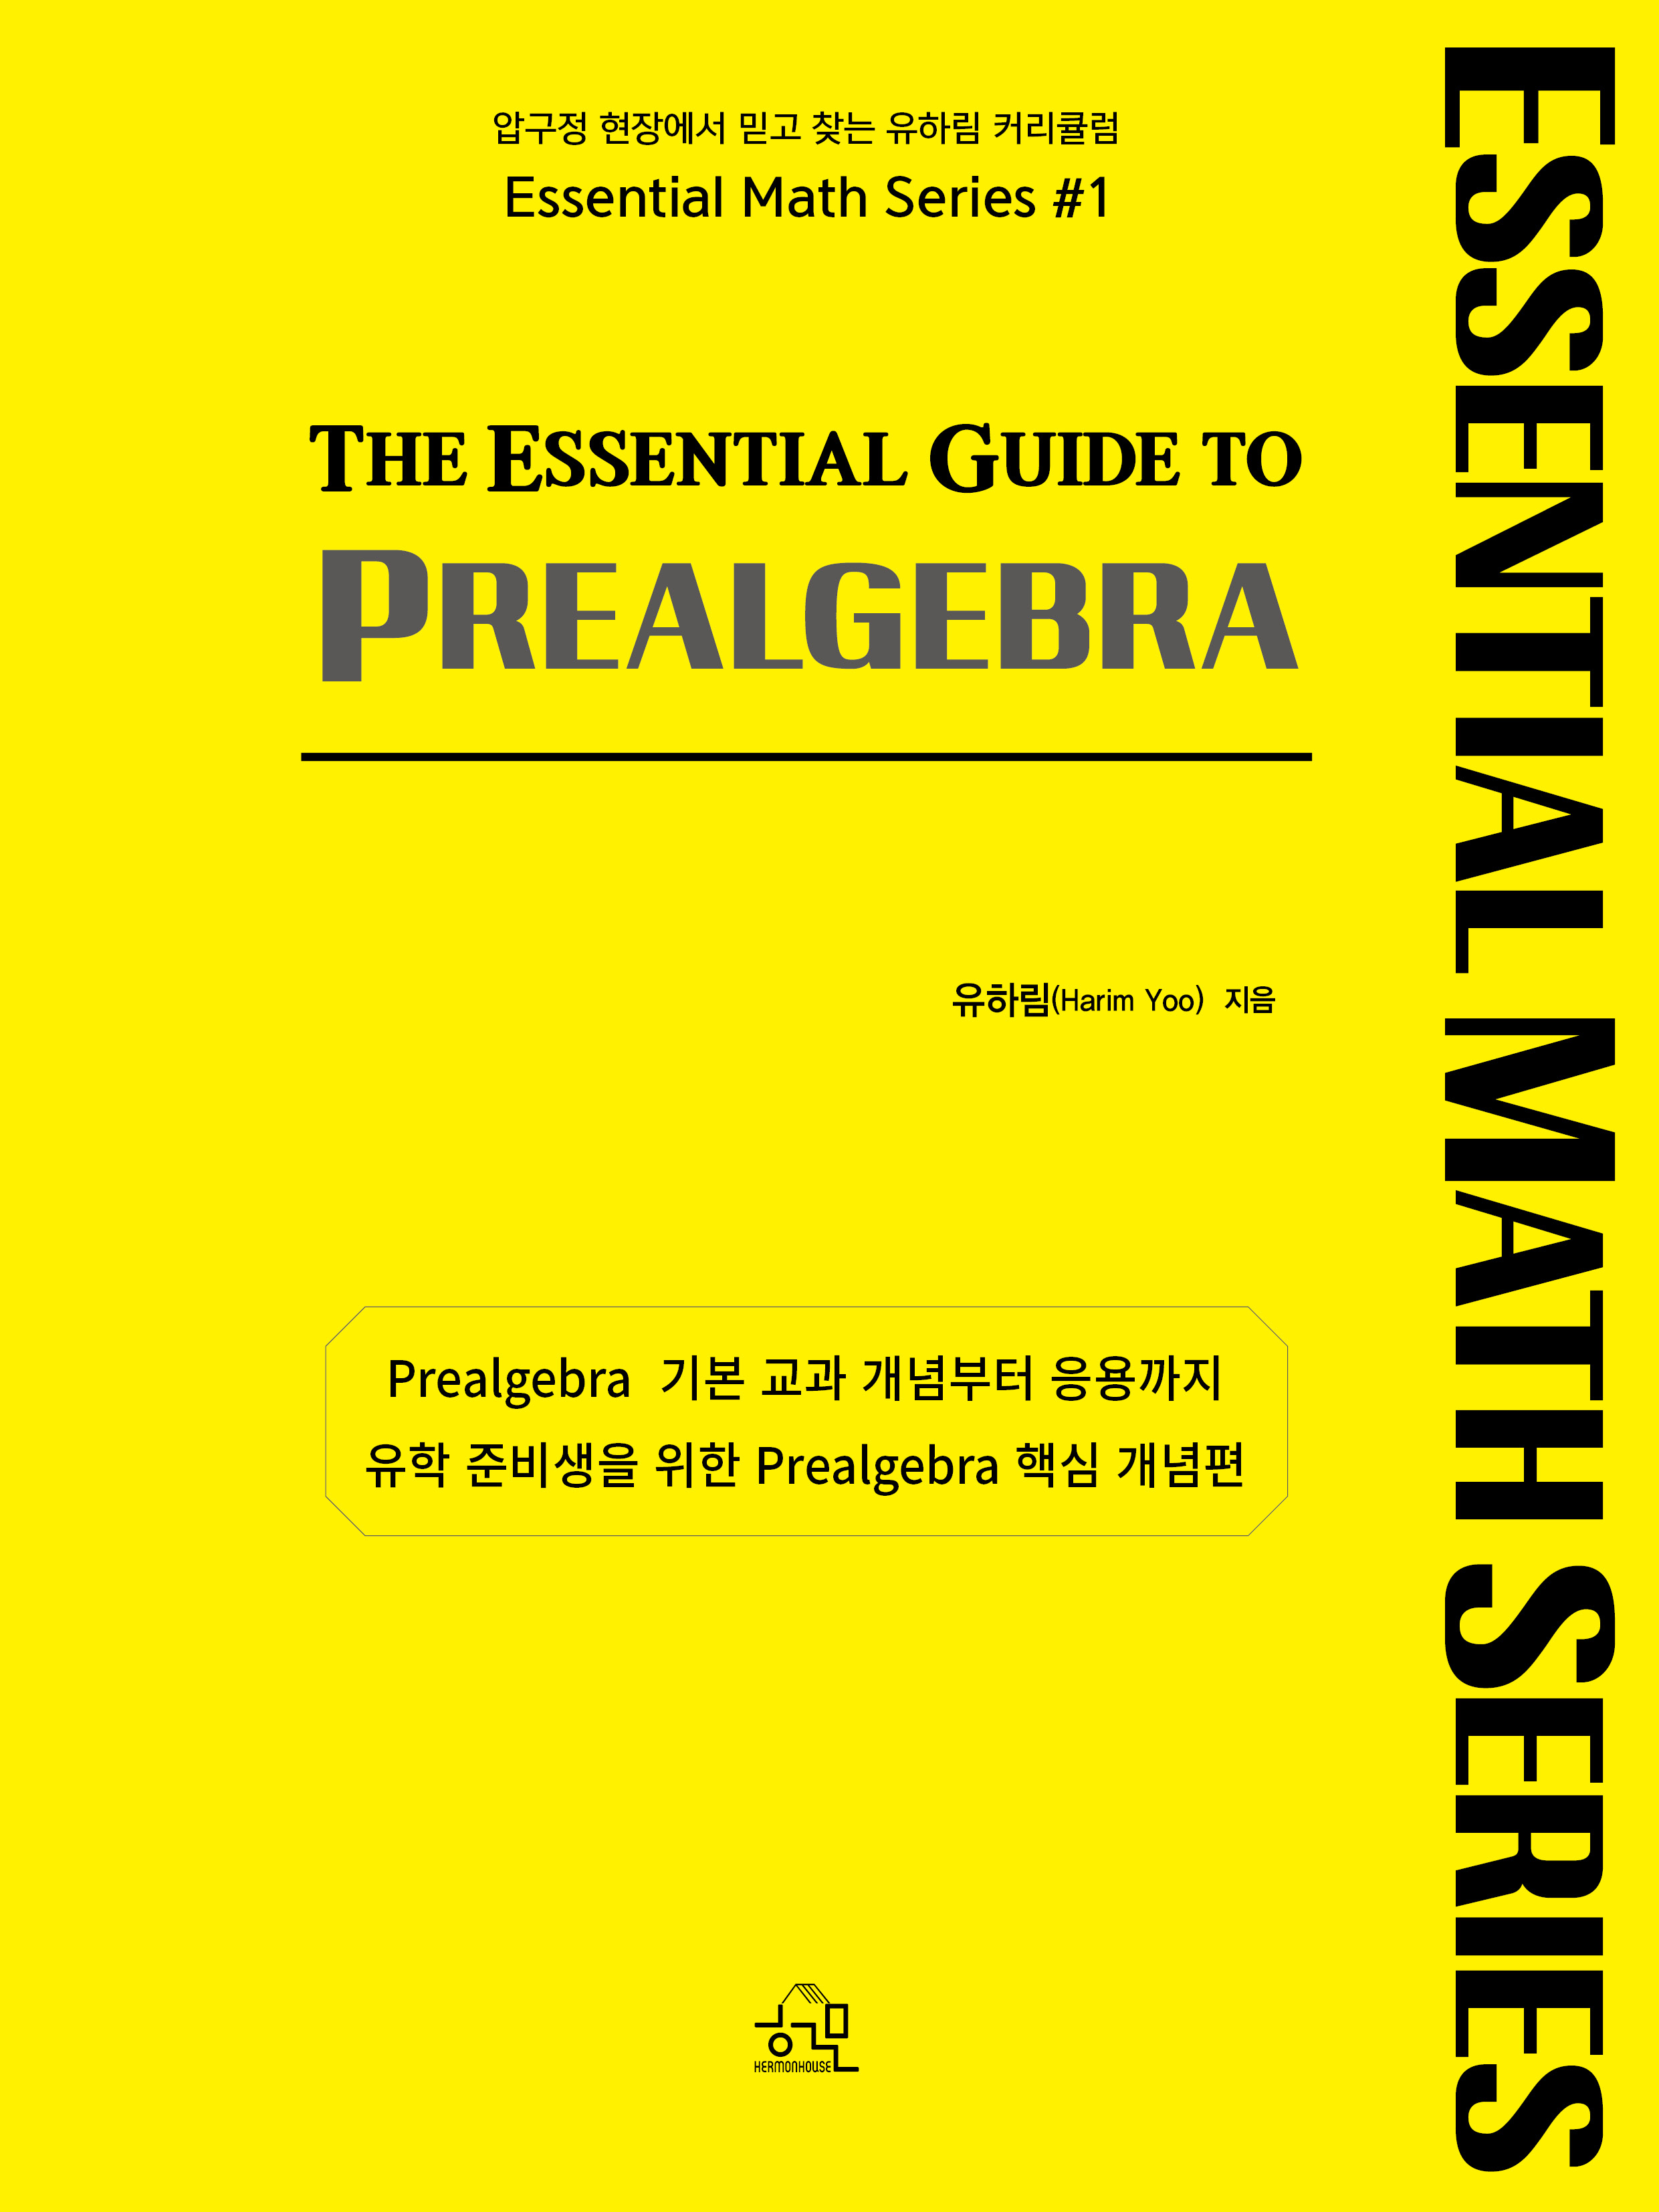 THE ESSENTIAL GUIDE TO PREALGEBRA